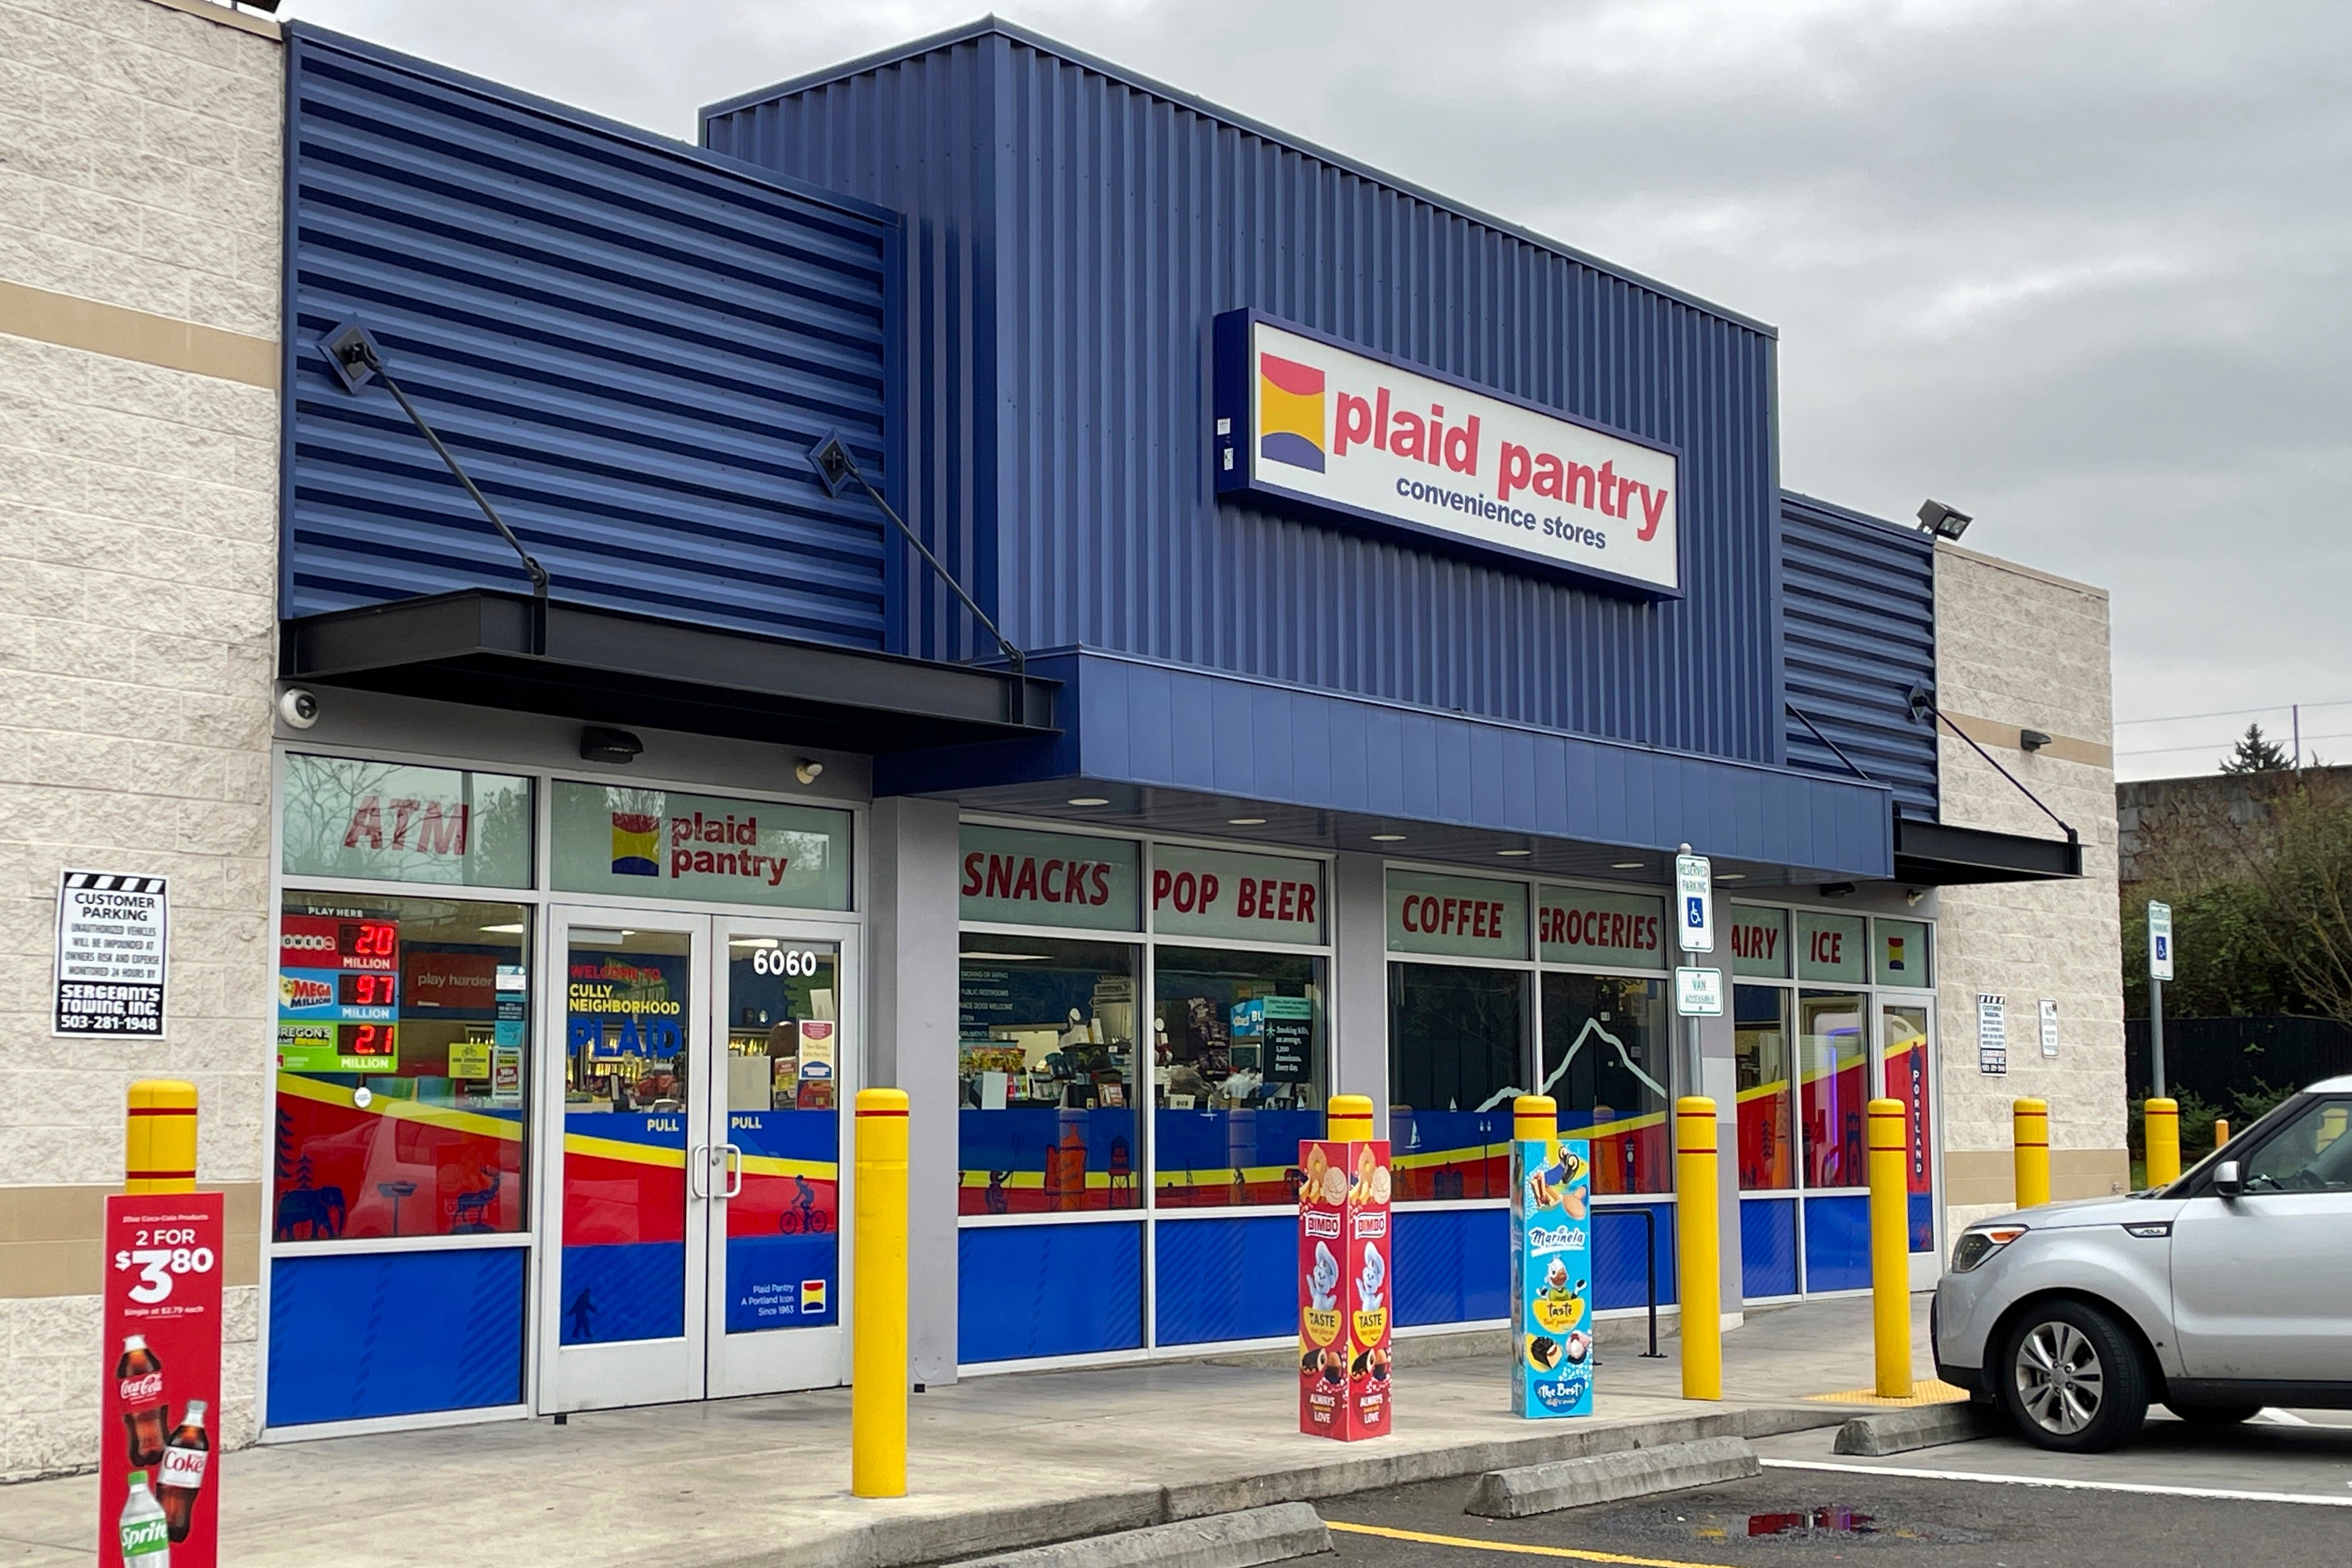 The Plaid Pantry convenience store that sold a $1.3bn Powerball jackpot, the eighth-largest lottery prize in US history, in Portland, Oregon